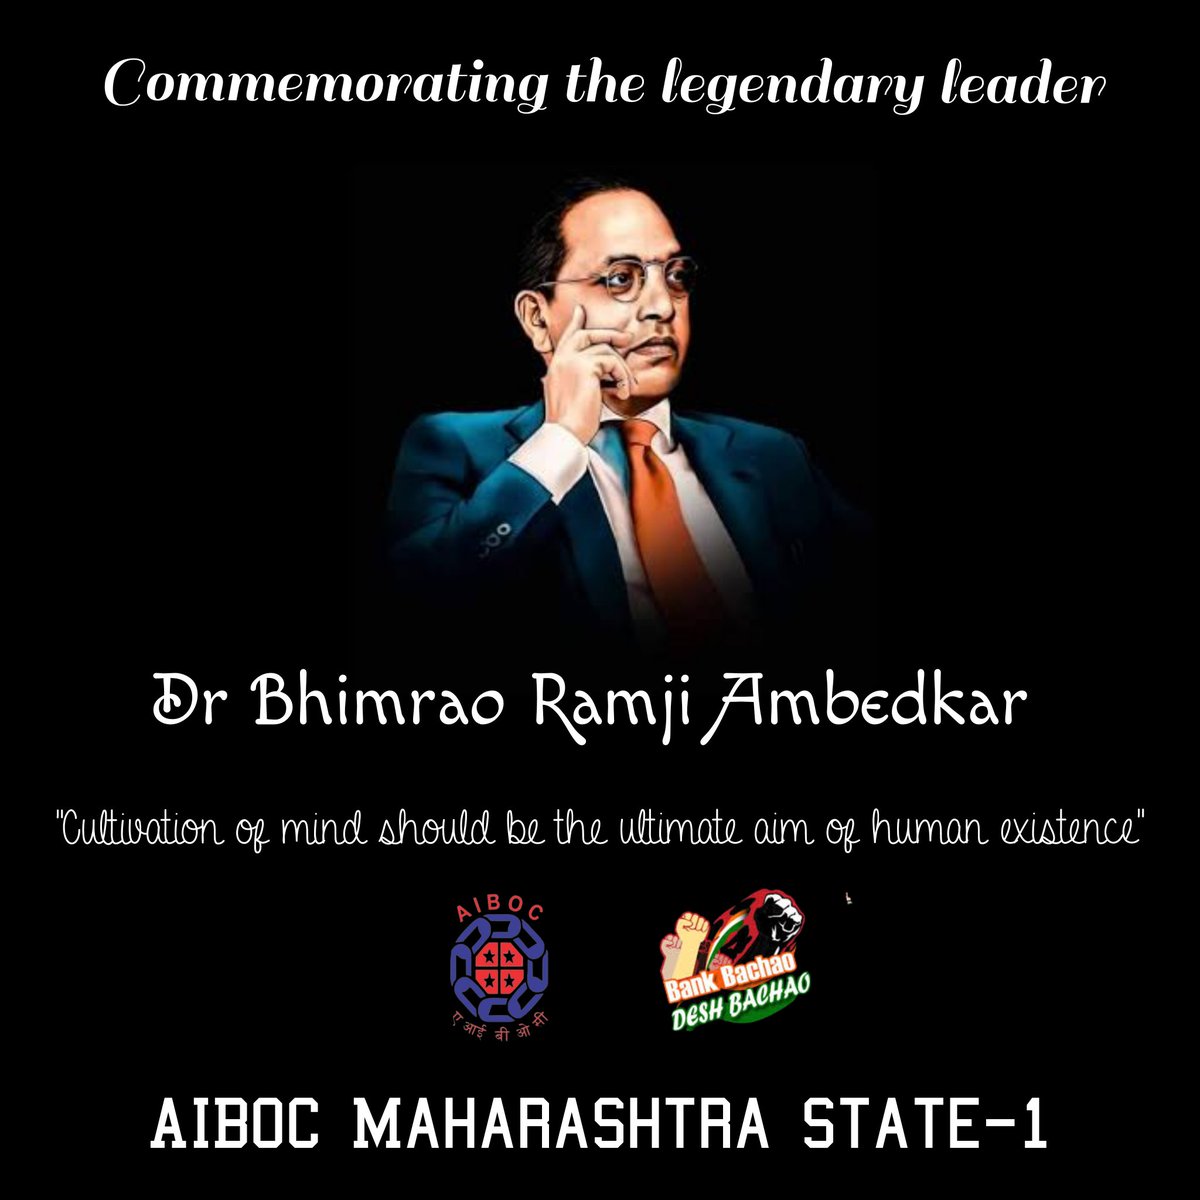 We bow down to the Chief Architect of Indian Constitution, an ace economist and a revolutionary figure in Modern India Bharat Ratna Dr Babasaheb Ambedkar. May his teachings inspire us to equality, justice and dignity of each individual #DrBabasahebAmbedkar #JaiBhim